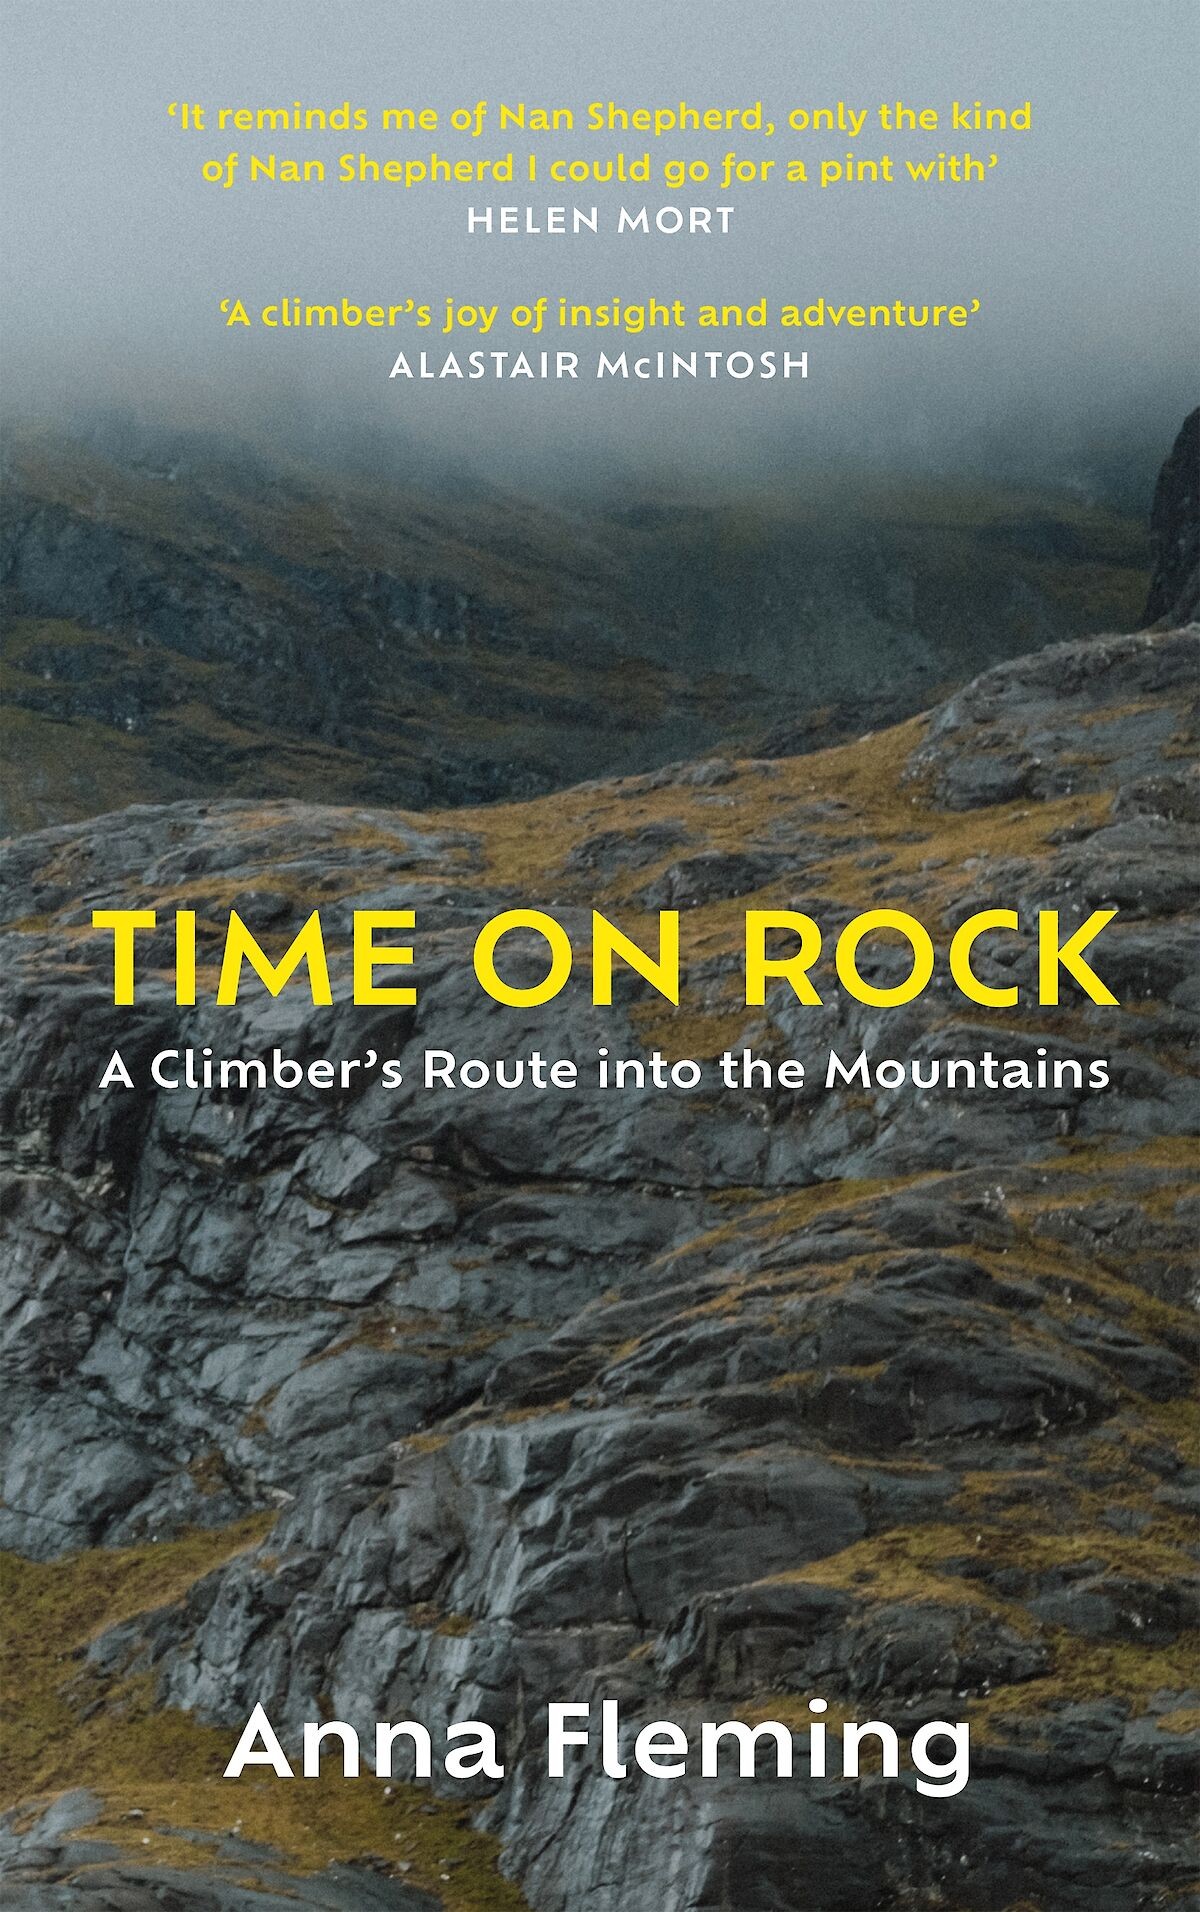 Anna Fleming 'Time on Rock: A Climber's Guide to the Mountains'